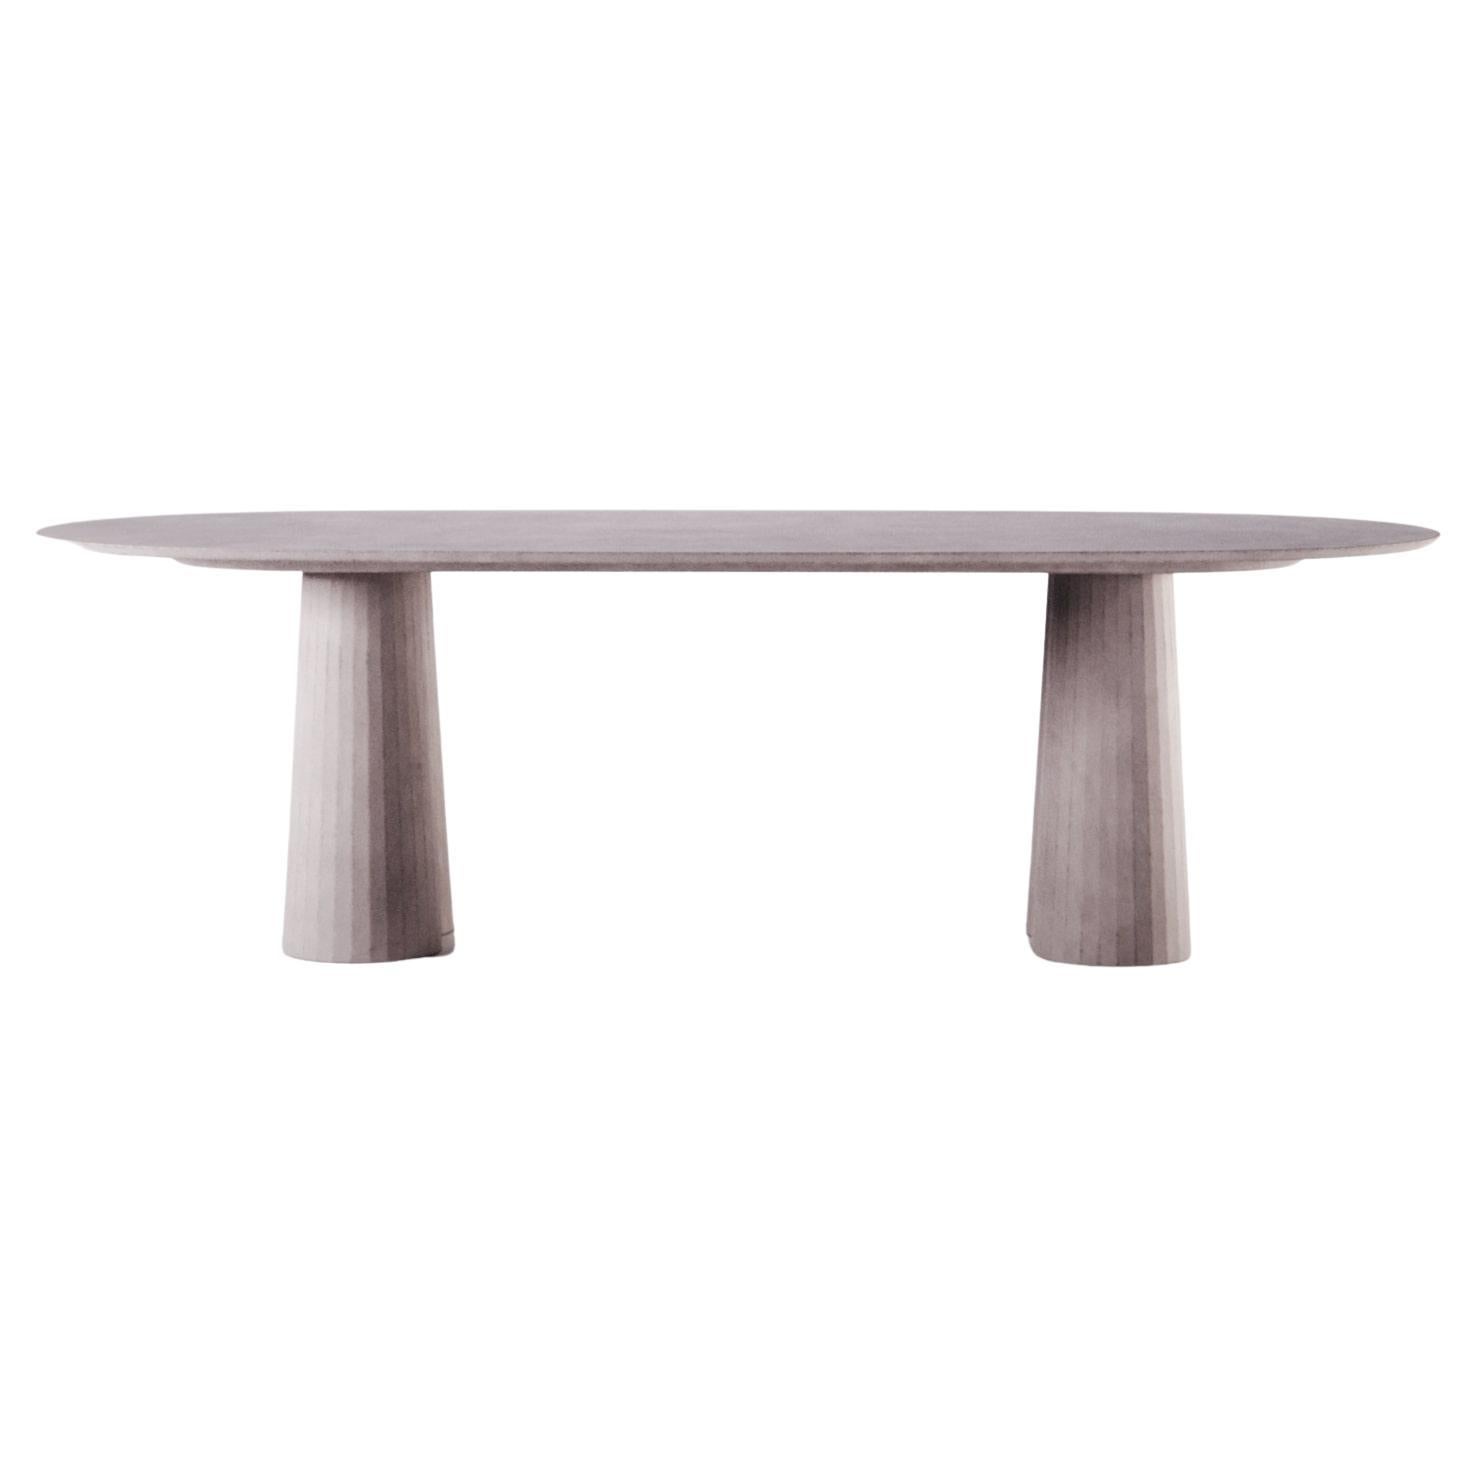 21st Century Concrete Oval Shape Table Powder Cement Color Handmade in Italy